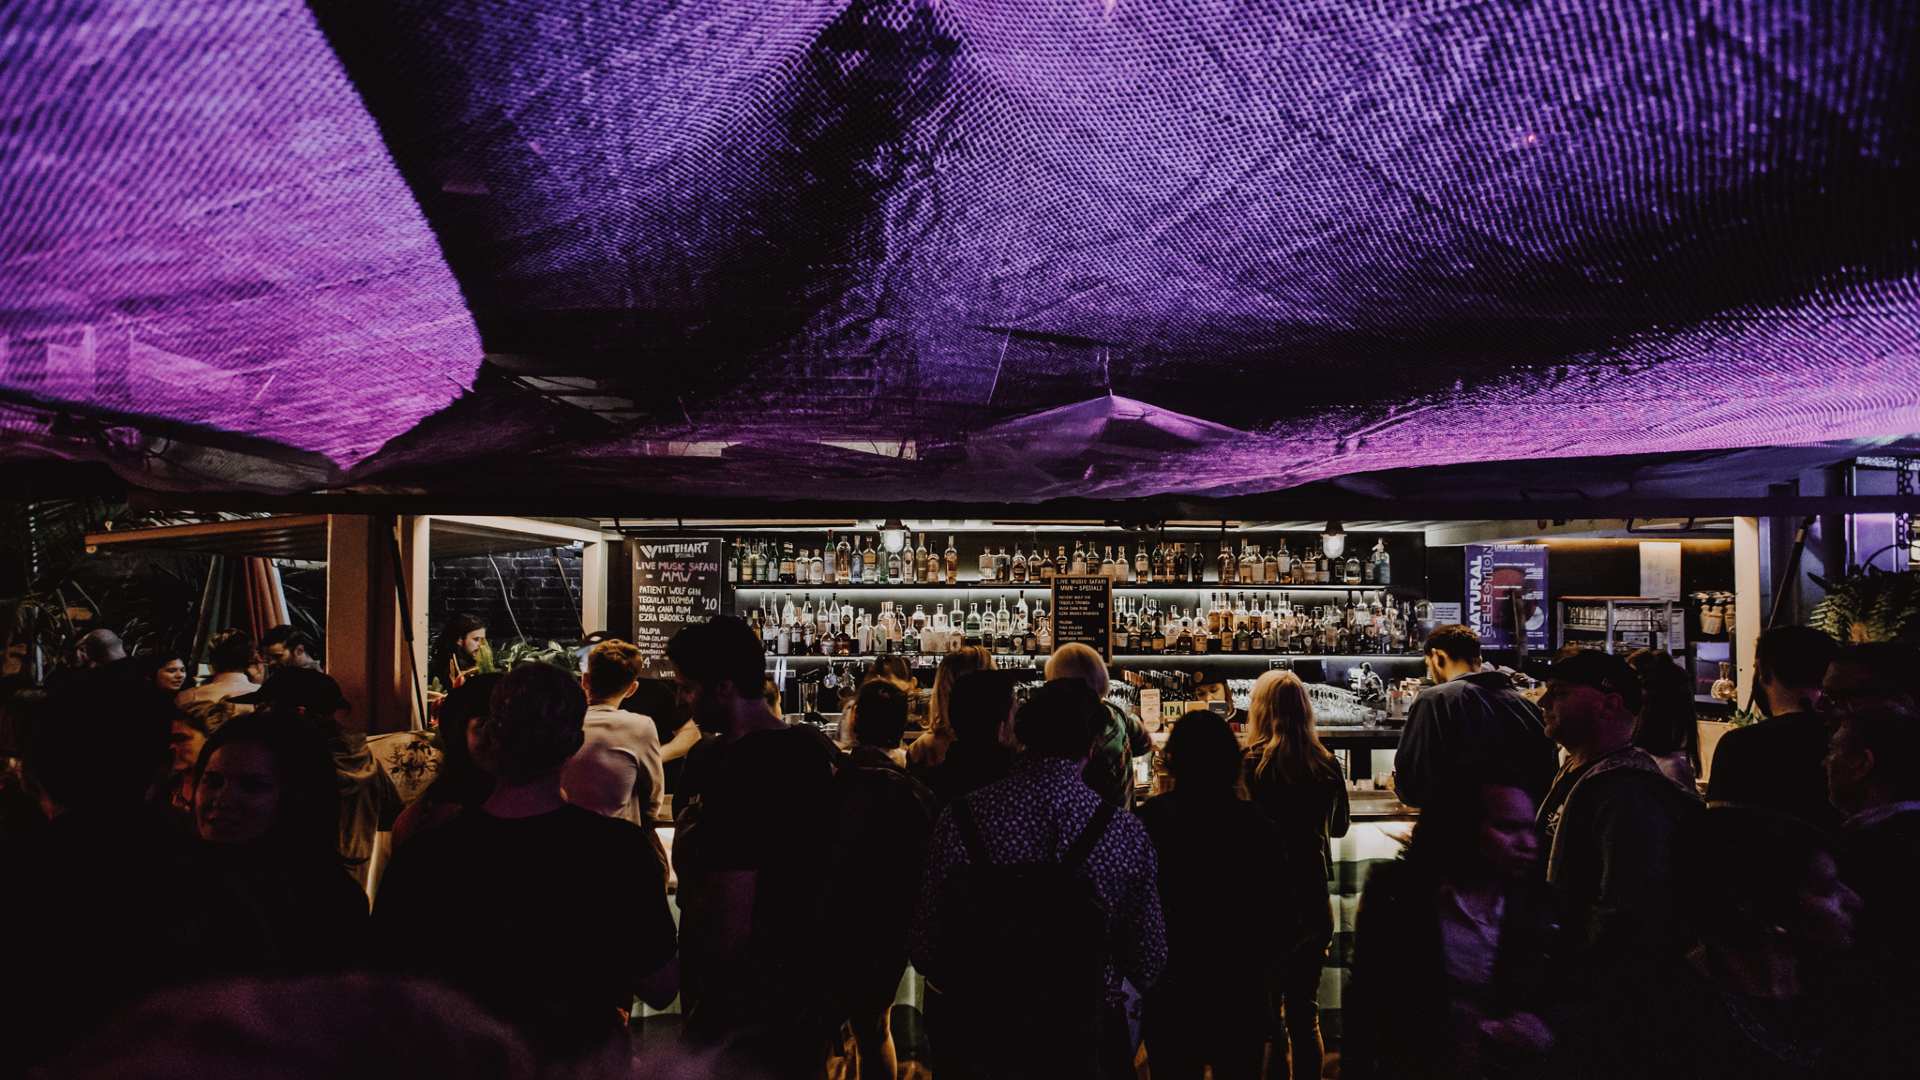 Whitehart - one of the best Melbourne bars for dancing